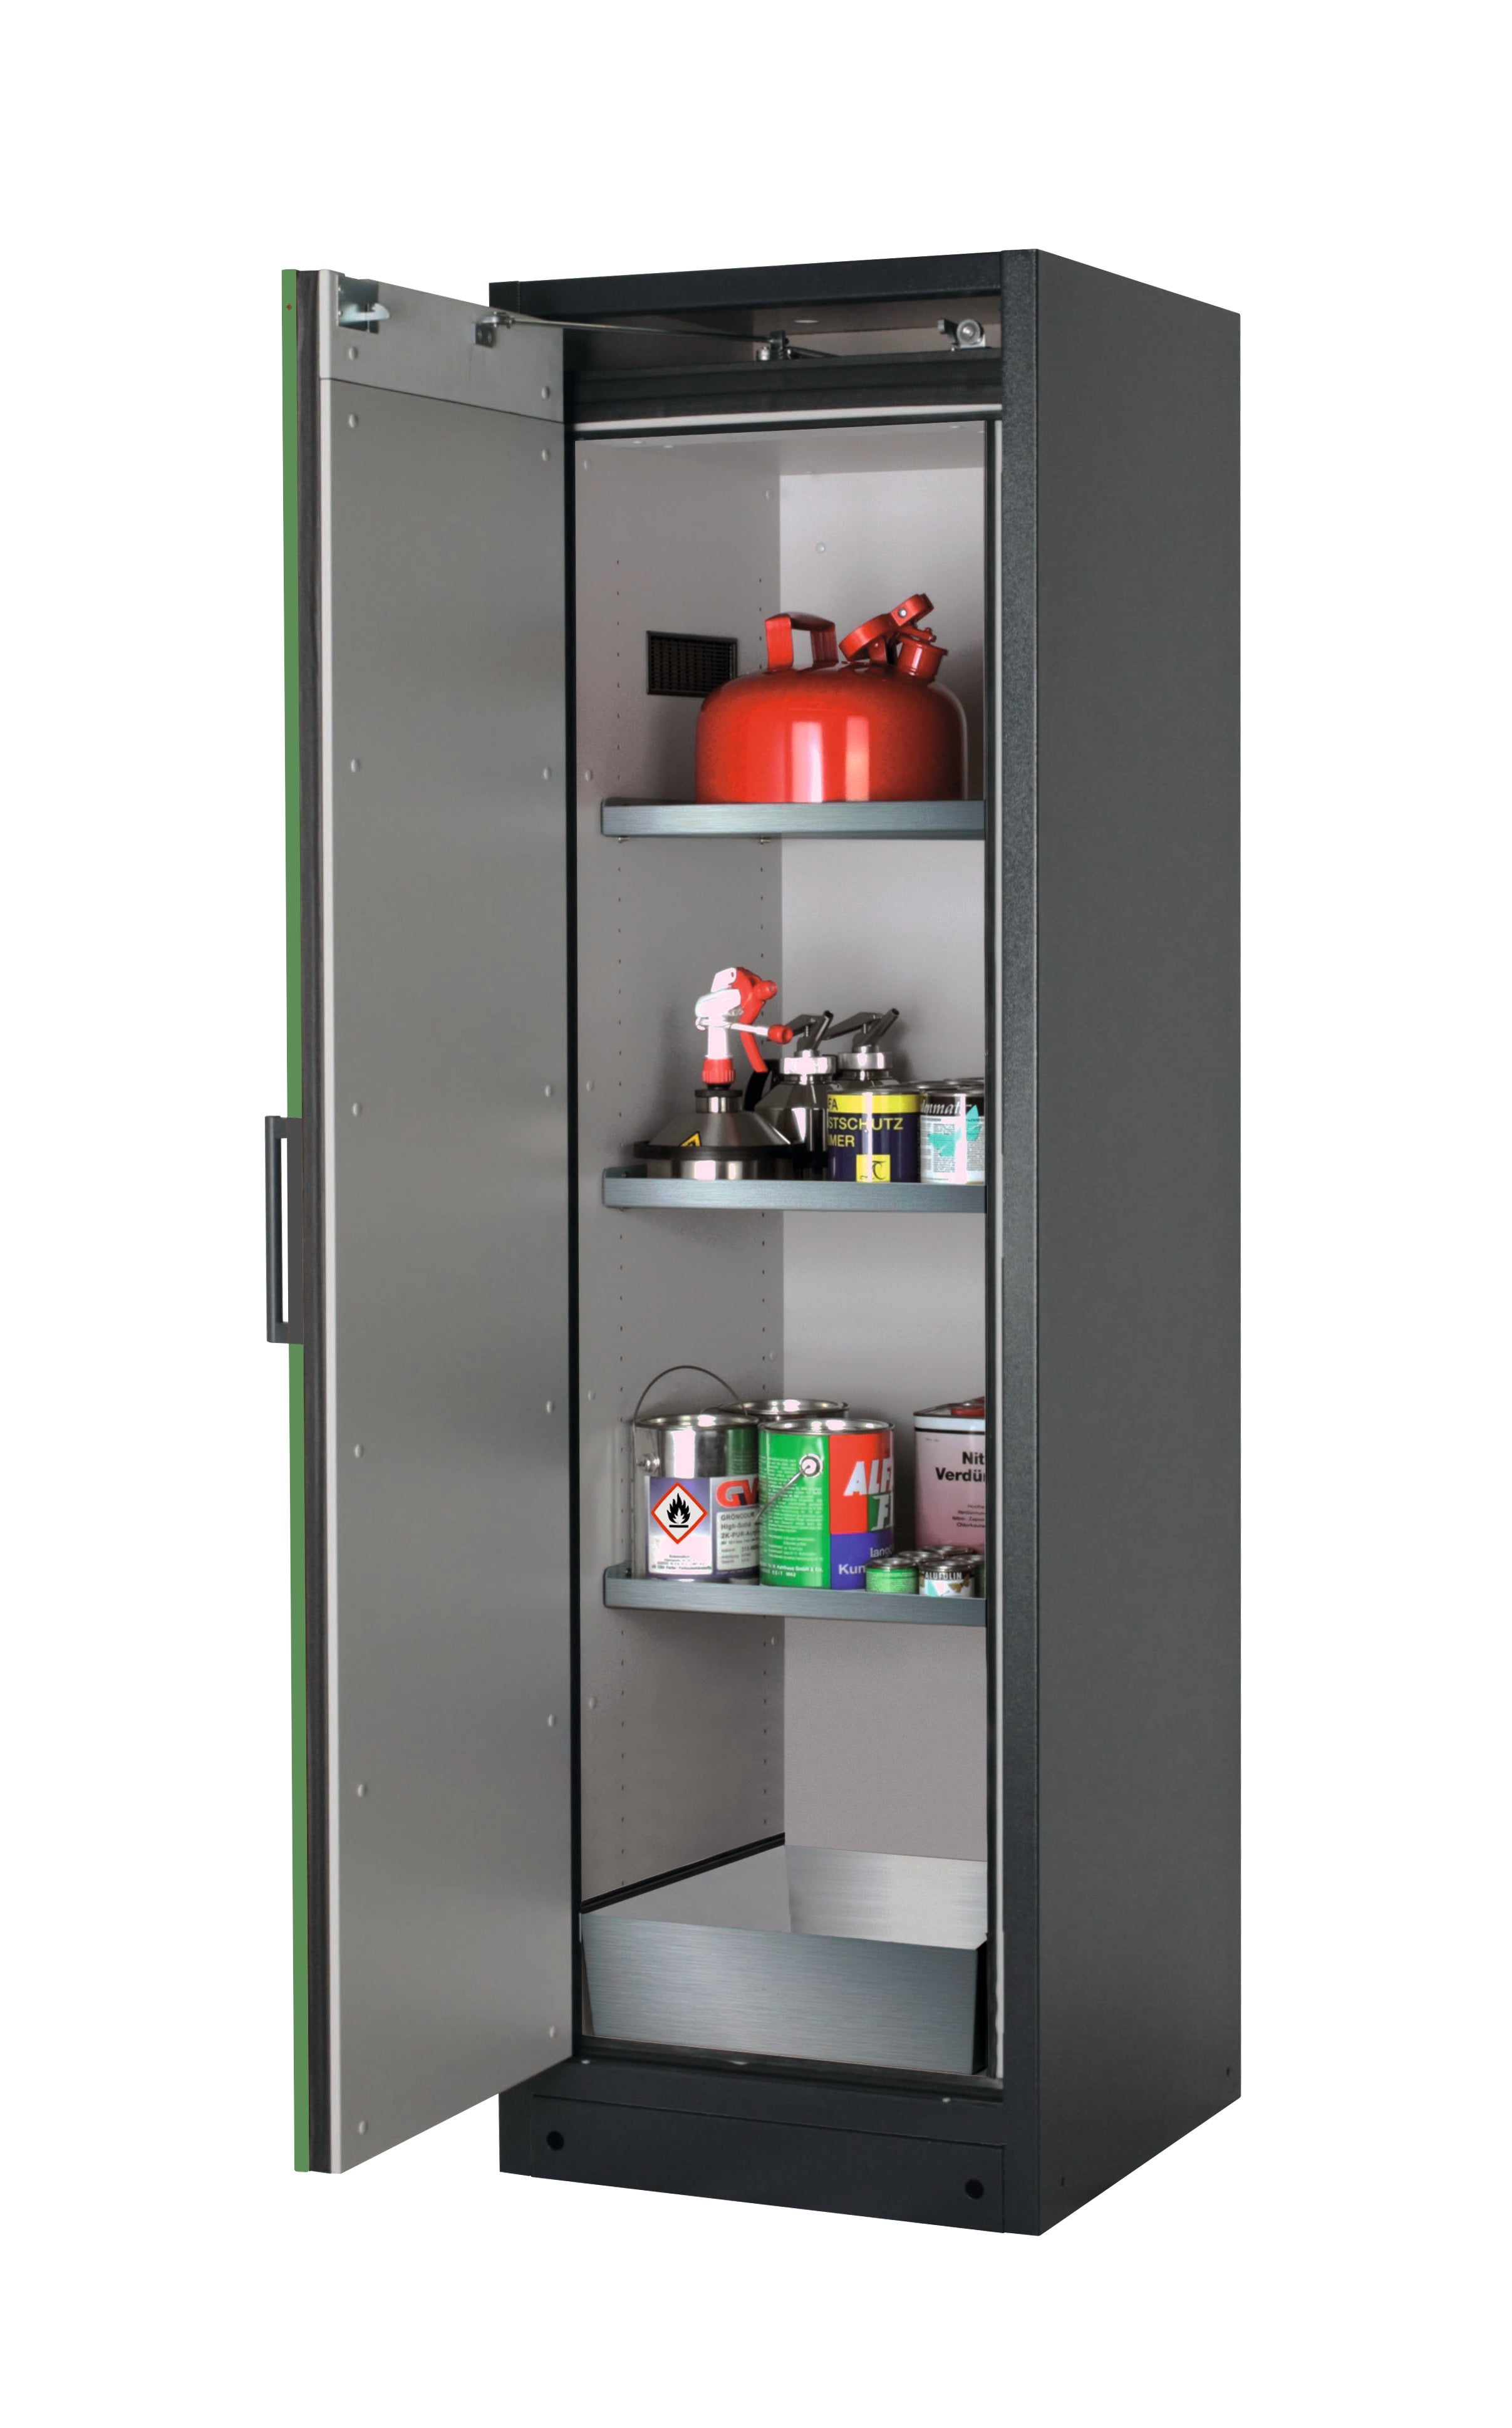 Type 90 safety storage cabinet Q-PEGASUS-90 model Q90.195.060.WDAC in reseda green RAL 6011 with 3x shelf standard (stainless steel 1.4301),